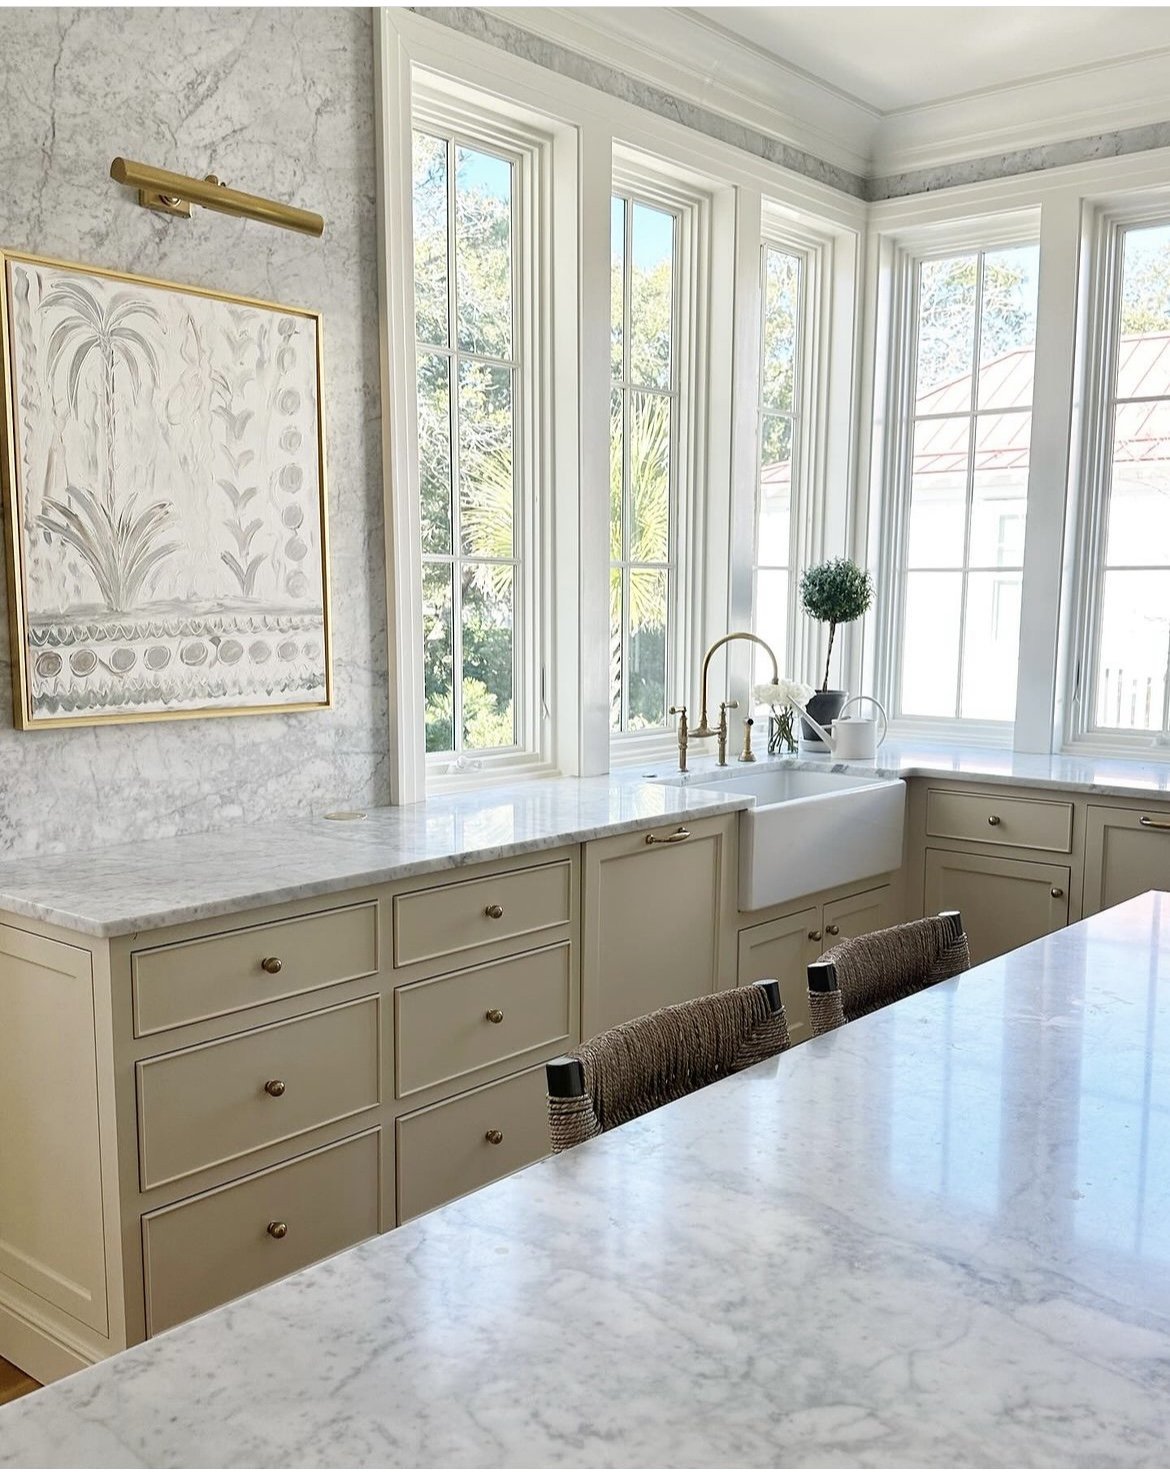 Betsey Mosby Interiors designed bespoke kitchen with farm sink, white marble, and warm beige cabinetry. #timelesskitchens #bespokekitchendesign